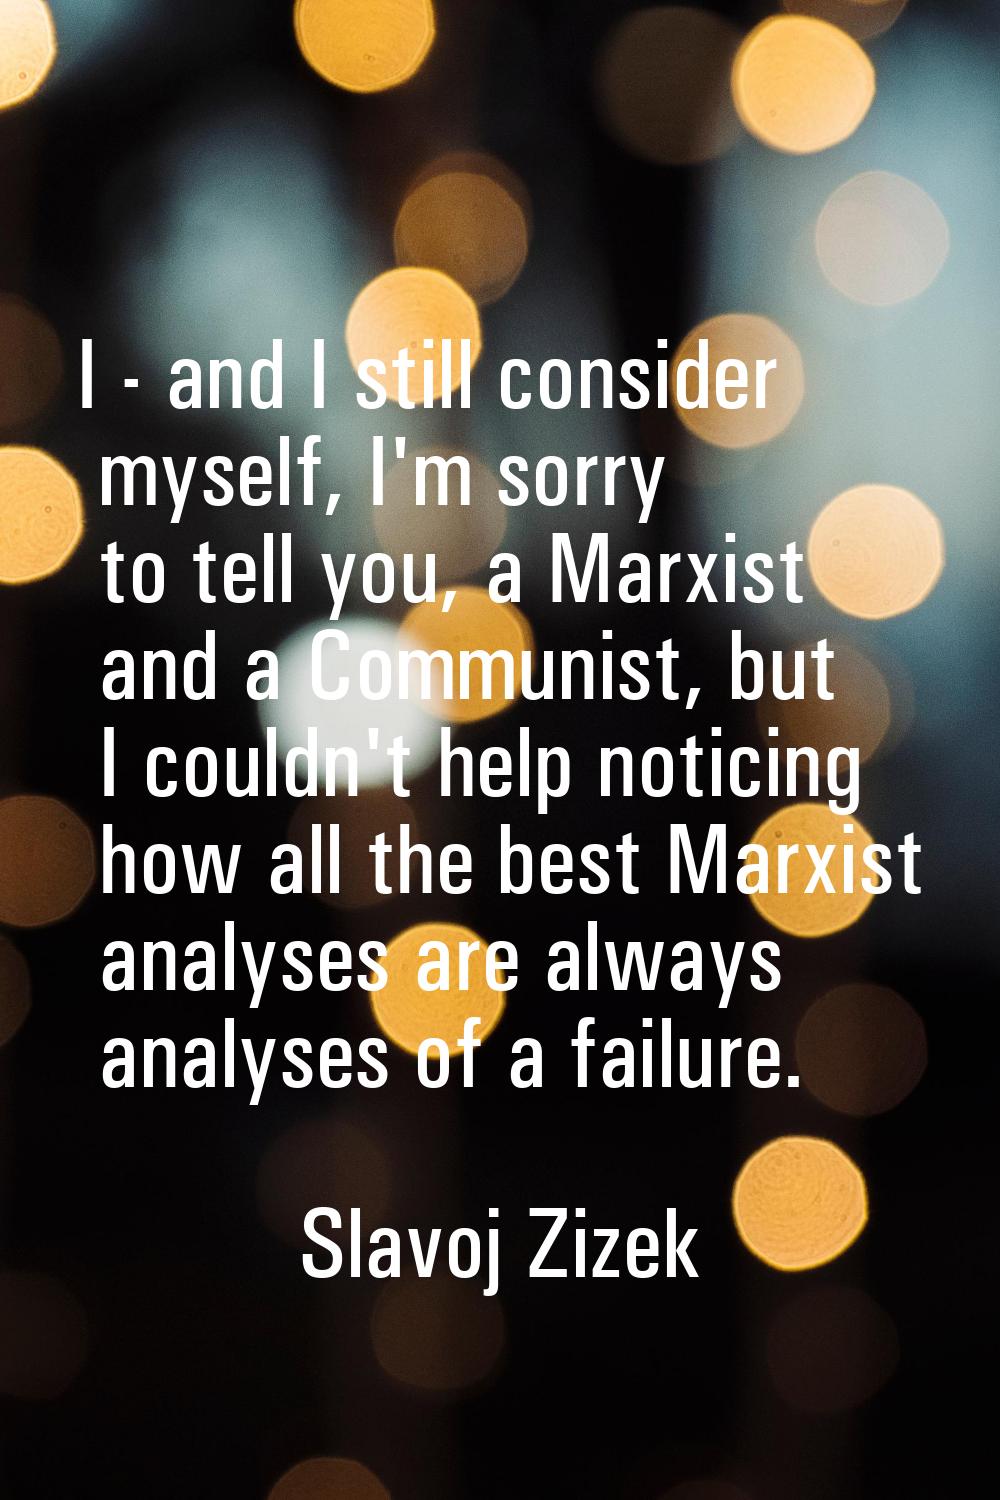 I - and I still consider myself, I'm sorry to tell you, a Marxist and a Communist, but I couldn't h